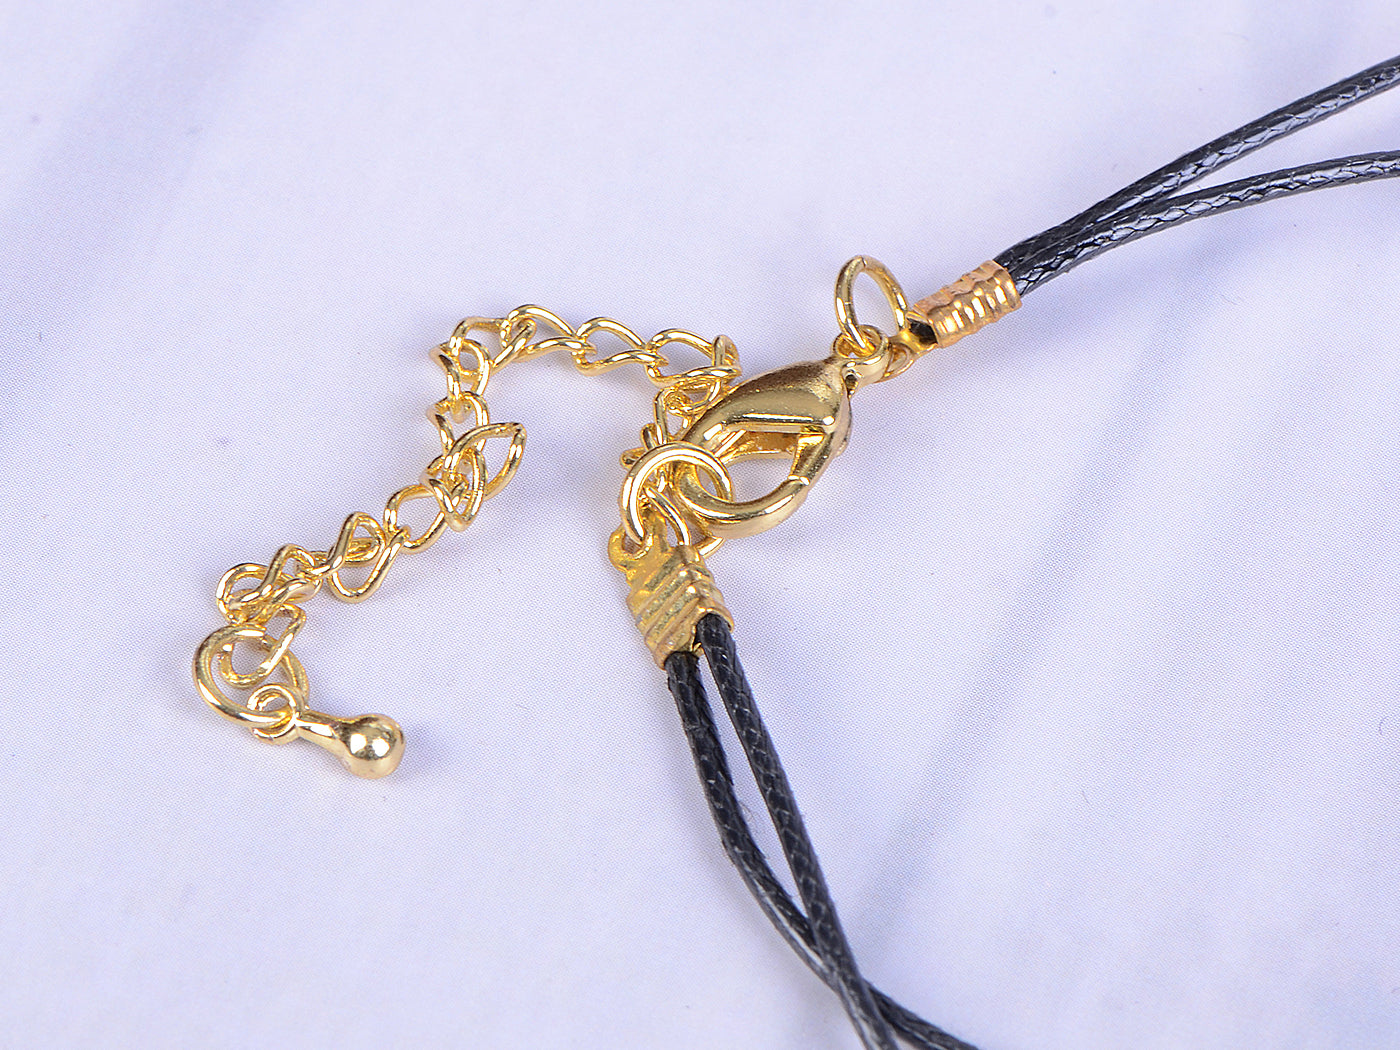 Squiggly Hanging Snake Reptile Pendant Necklace